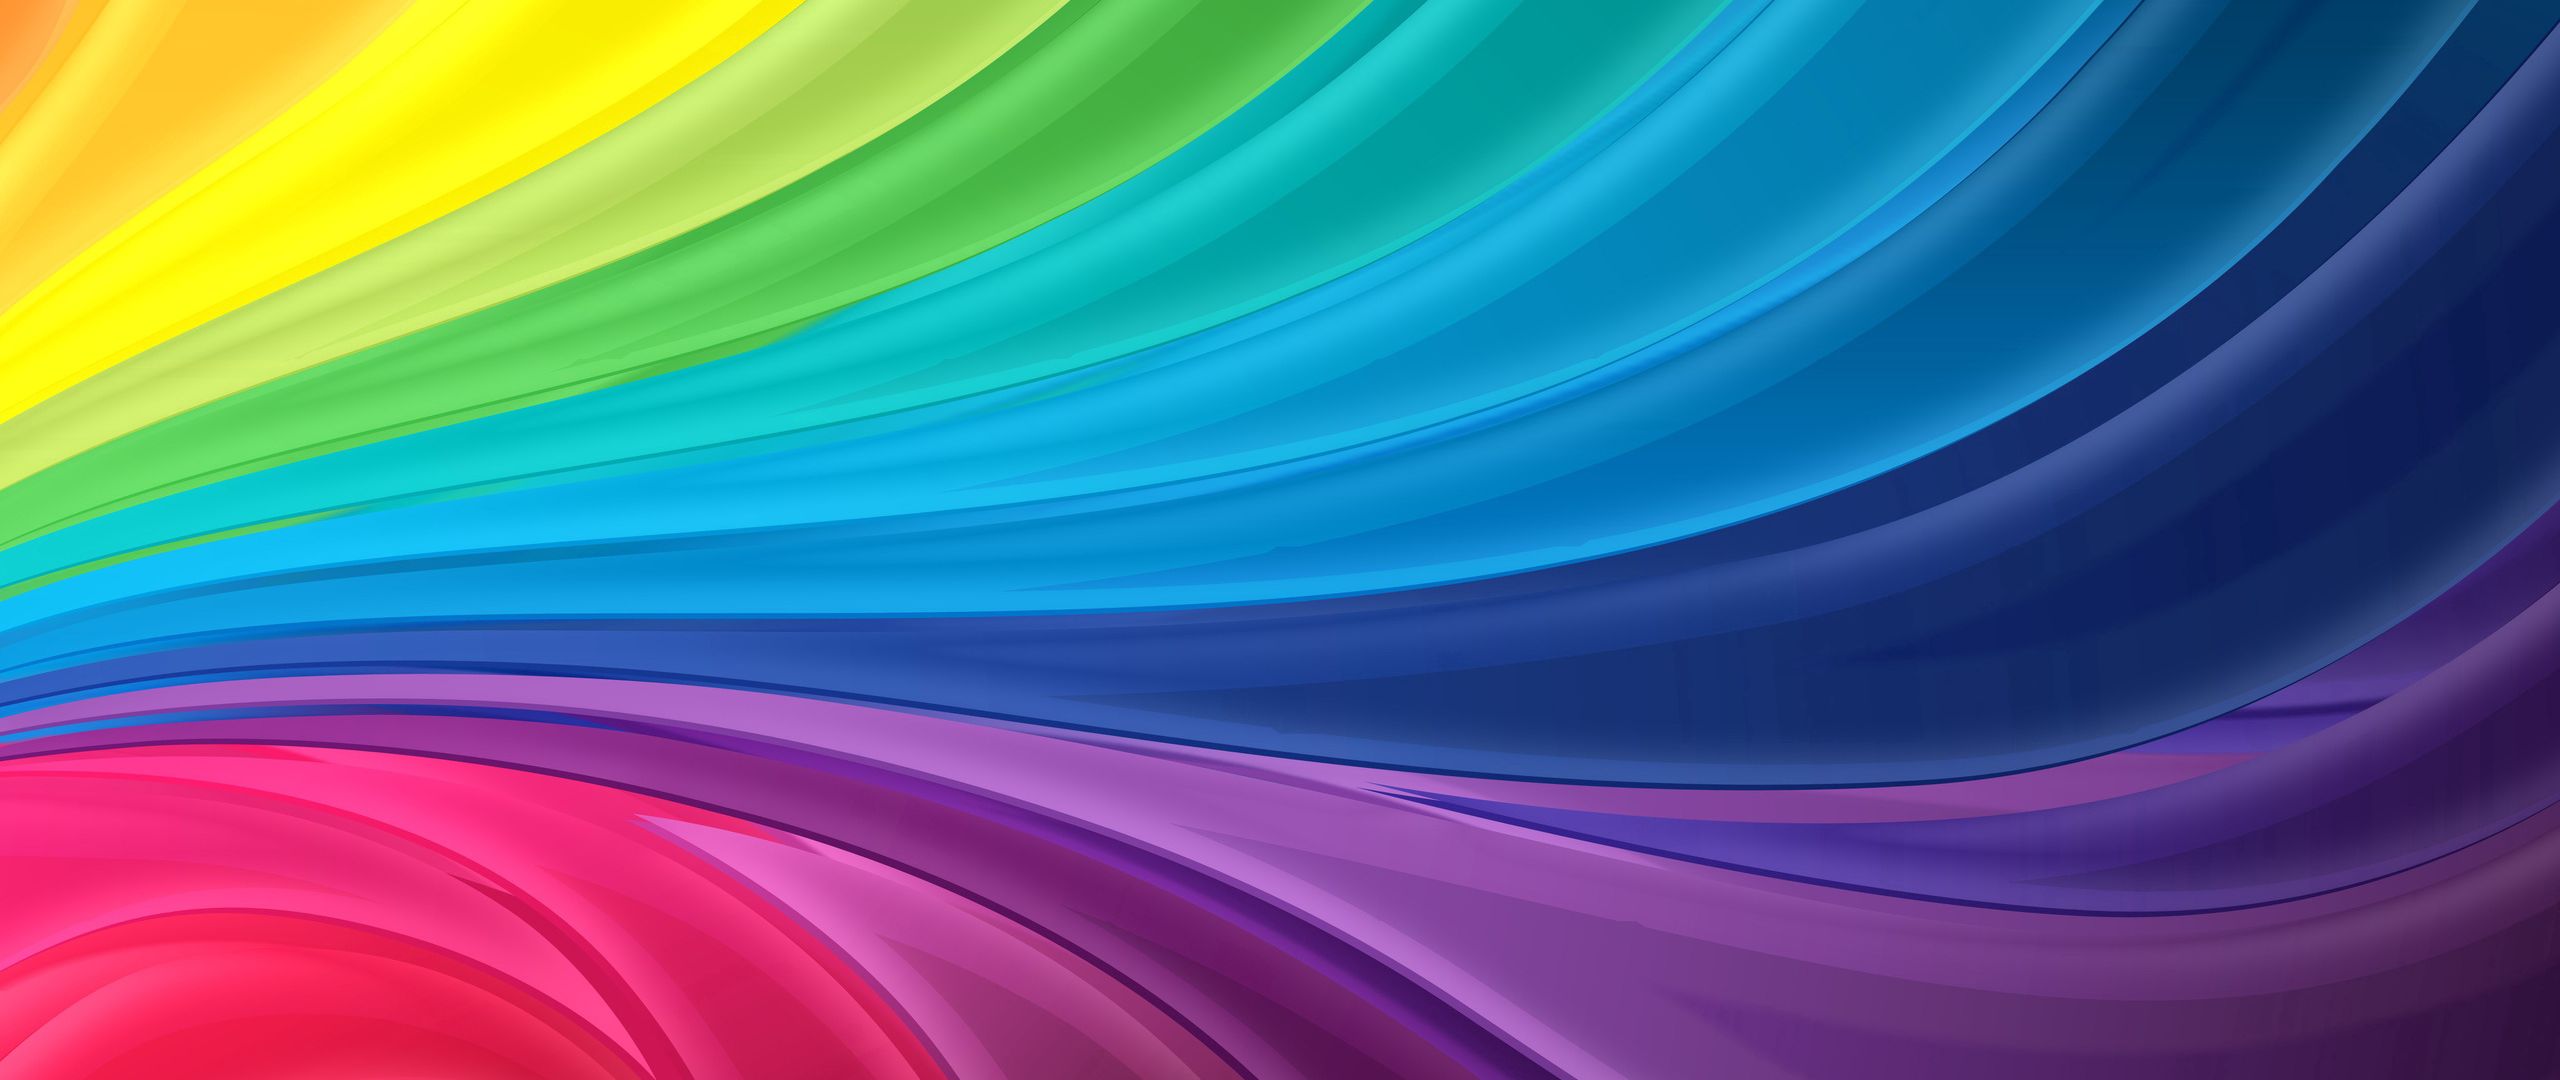 Download wallpaper 2560x1080 rainbow, line, light, colorful dual wide 1080p HD background